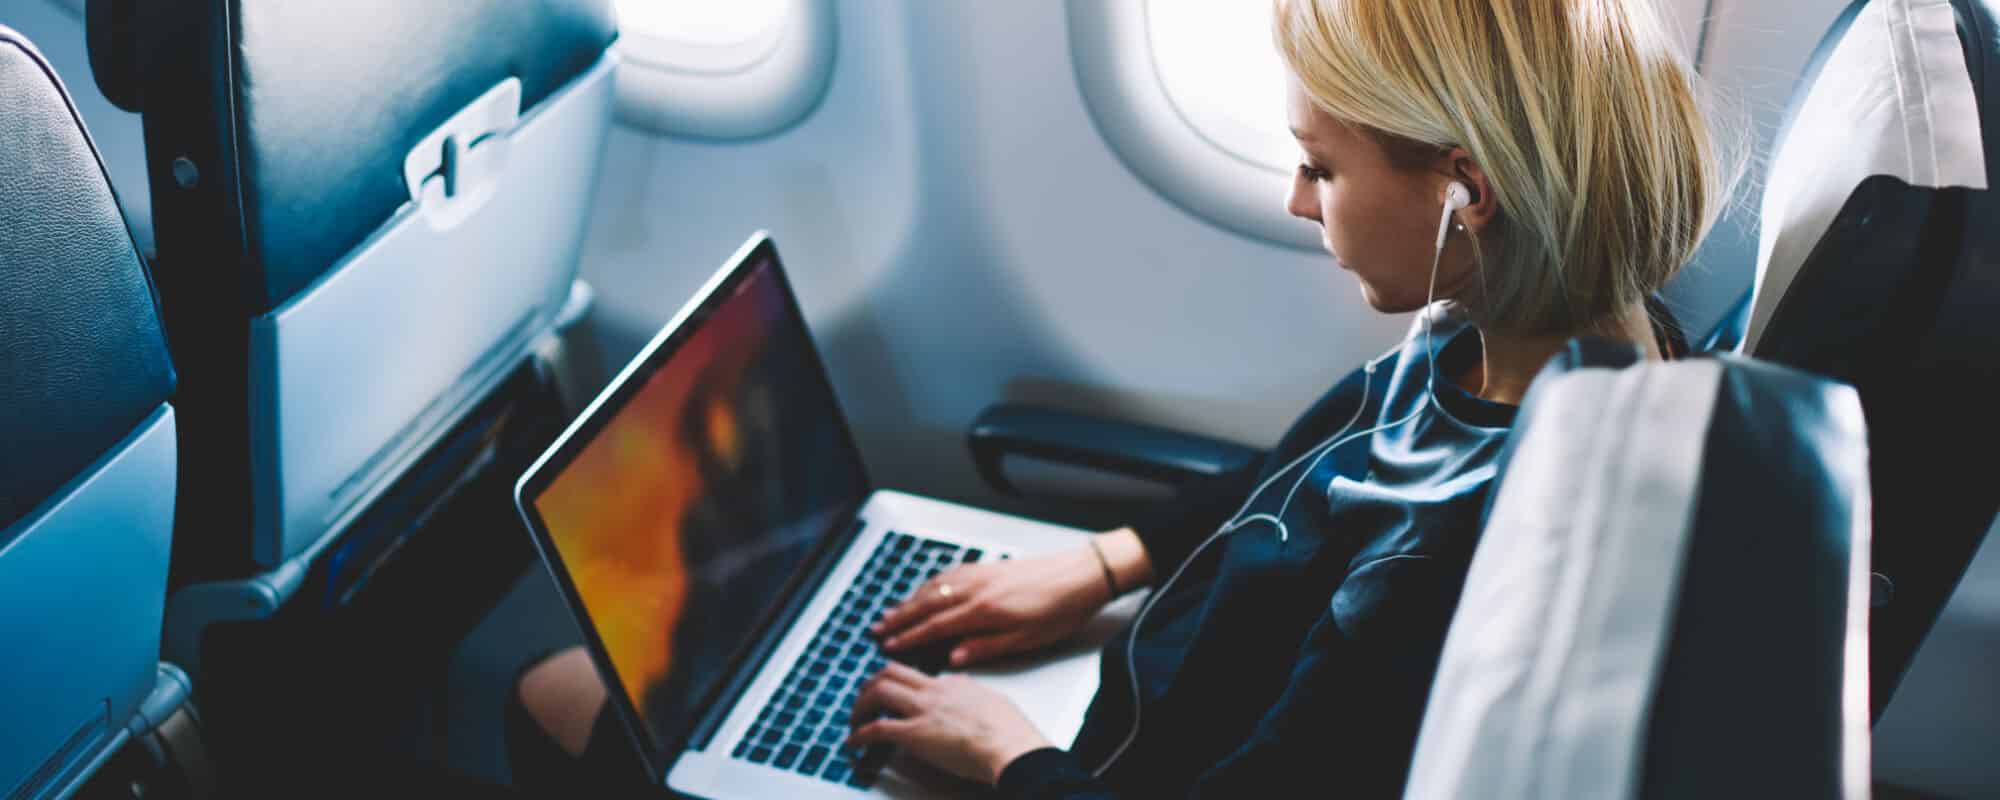 A person completing their work on a plane